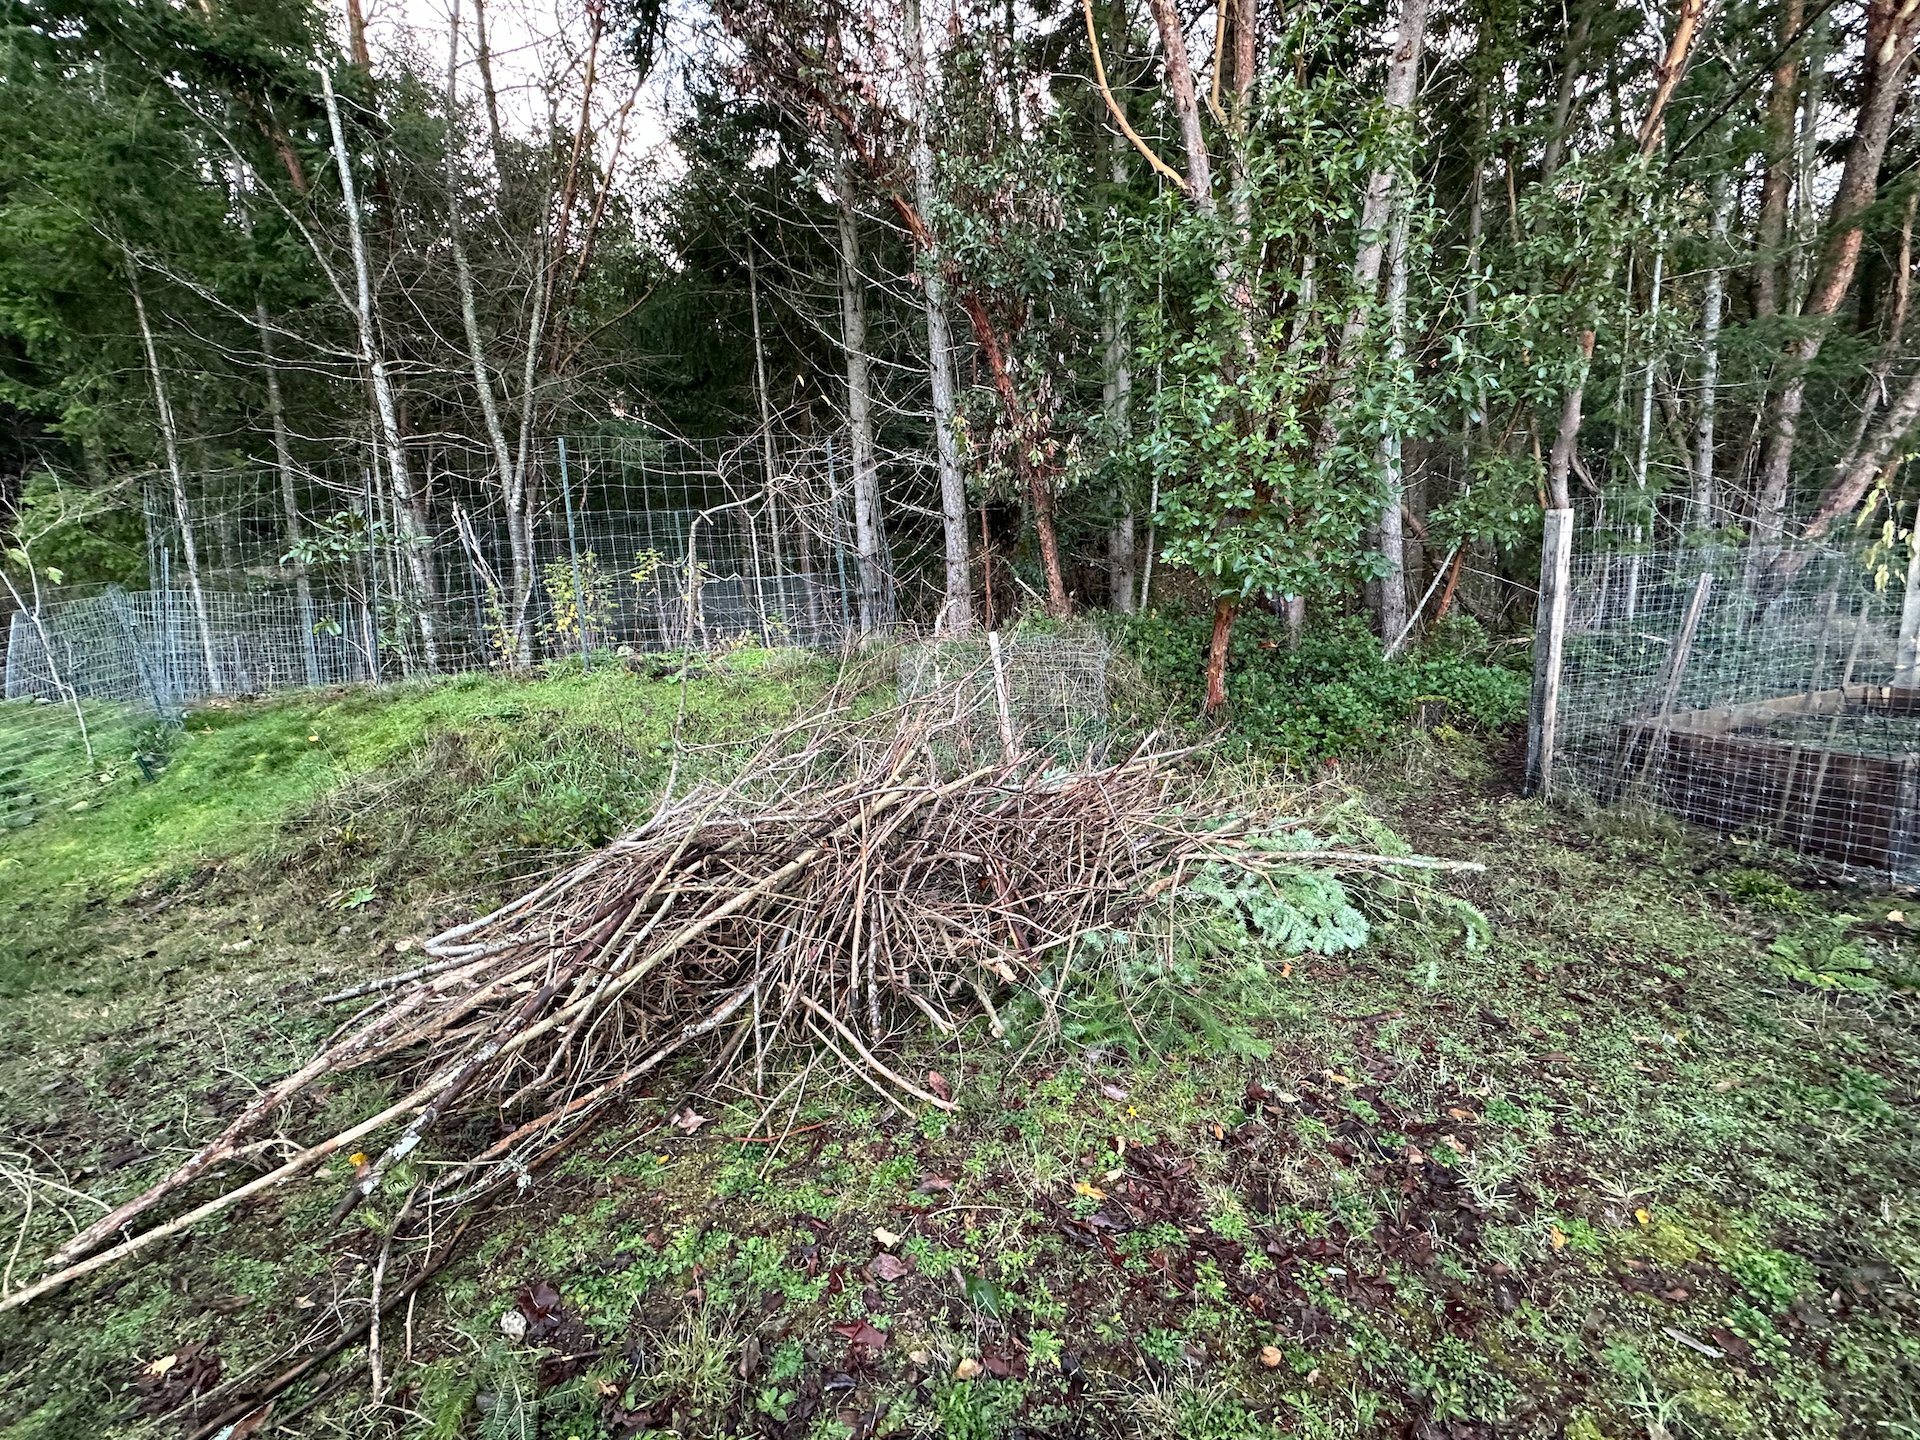  This was the pile of brush that I pulled from the forest earlier in the week. 